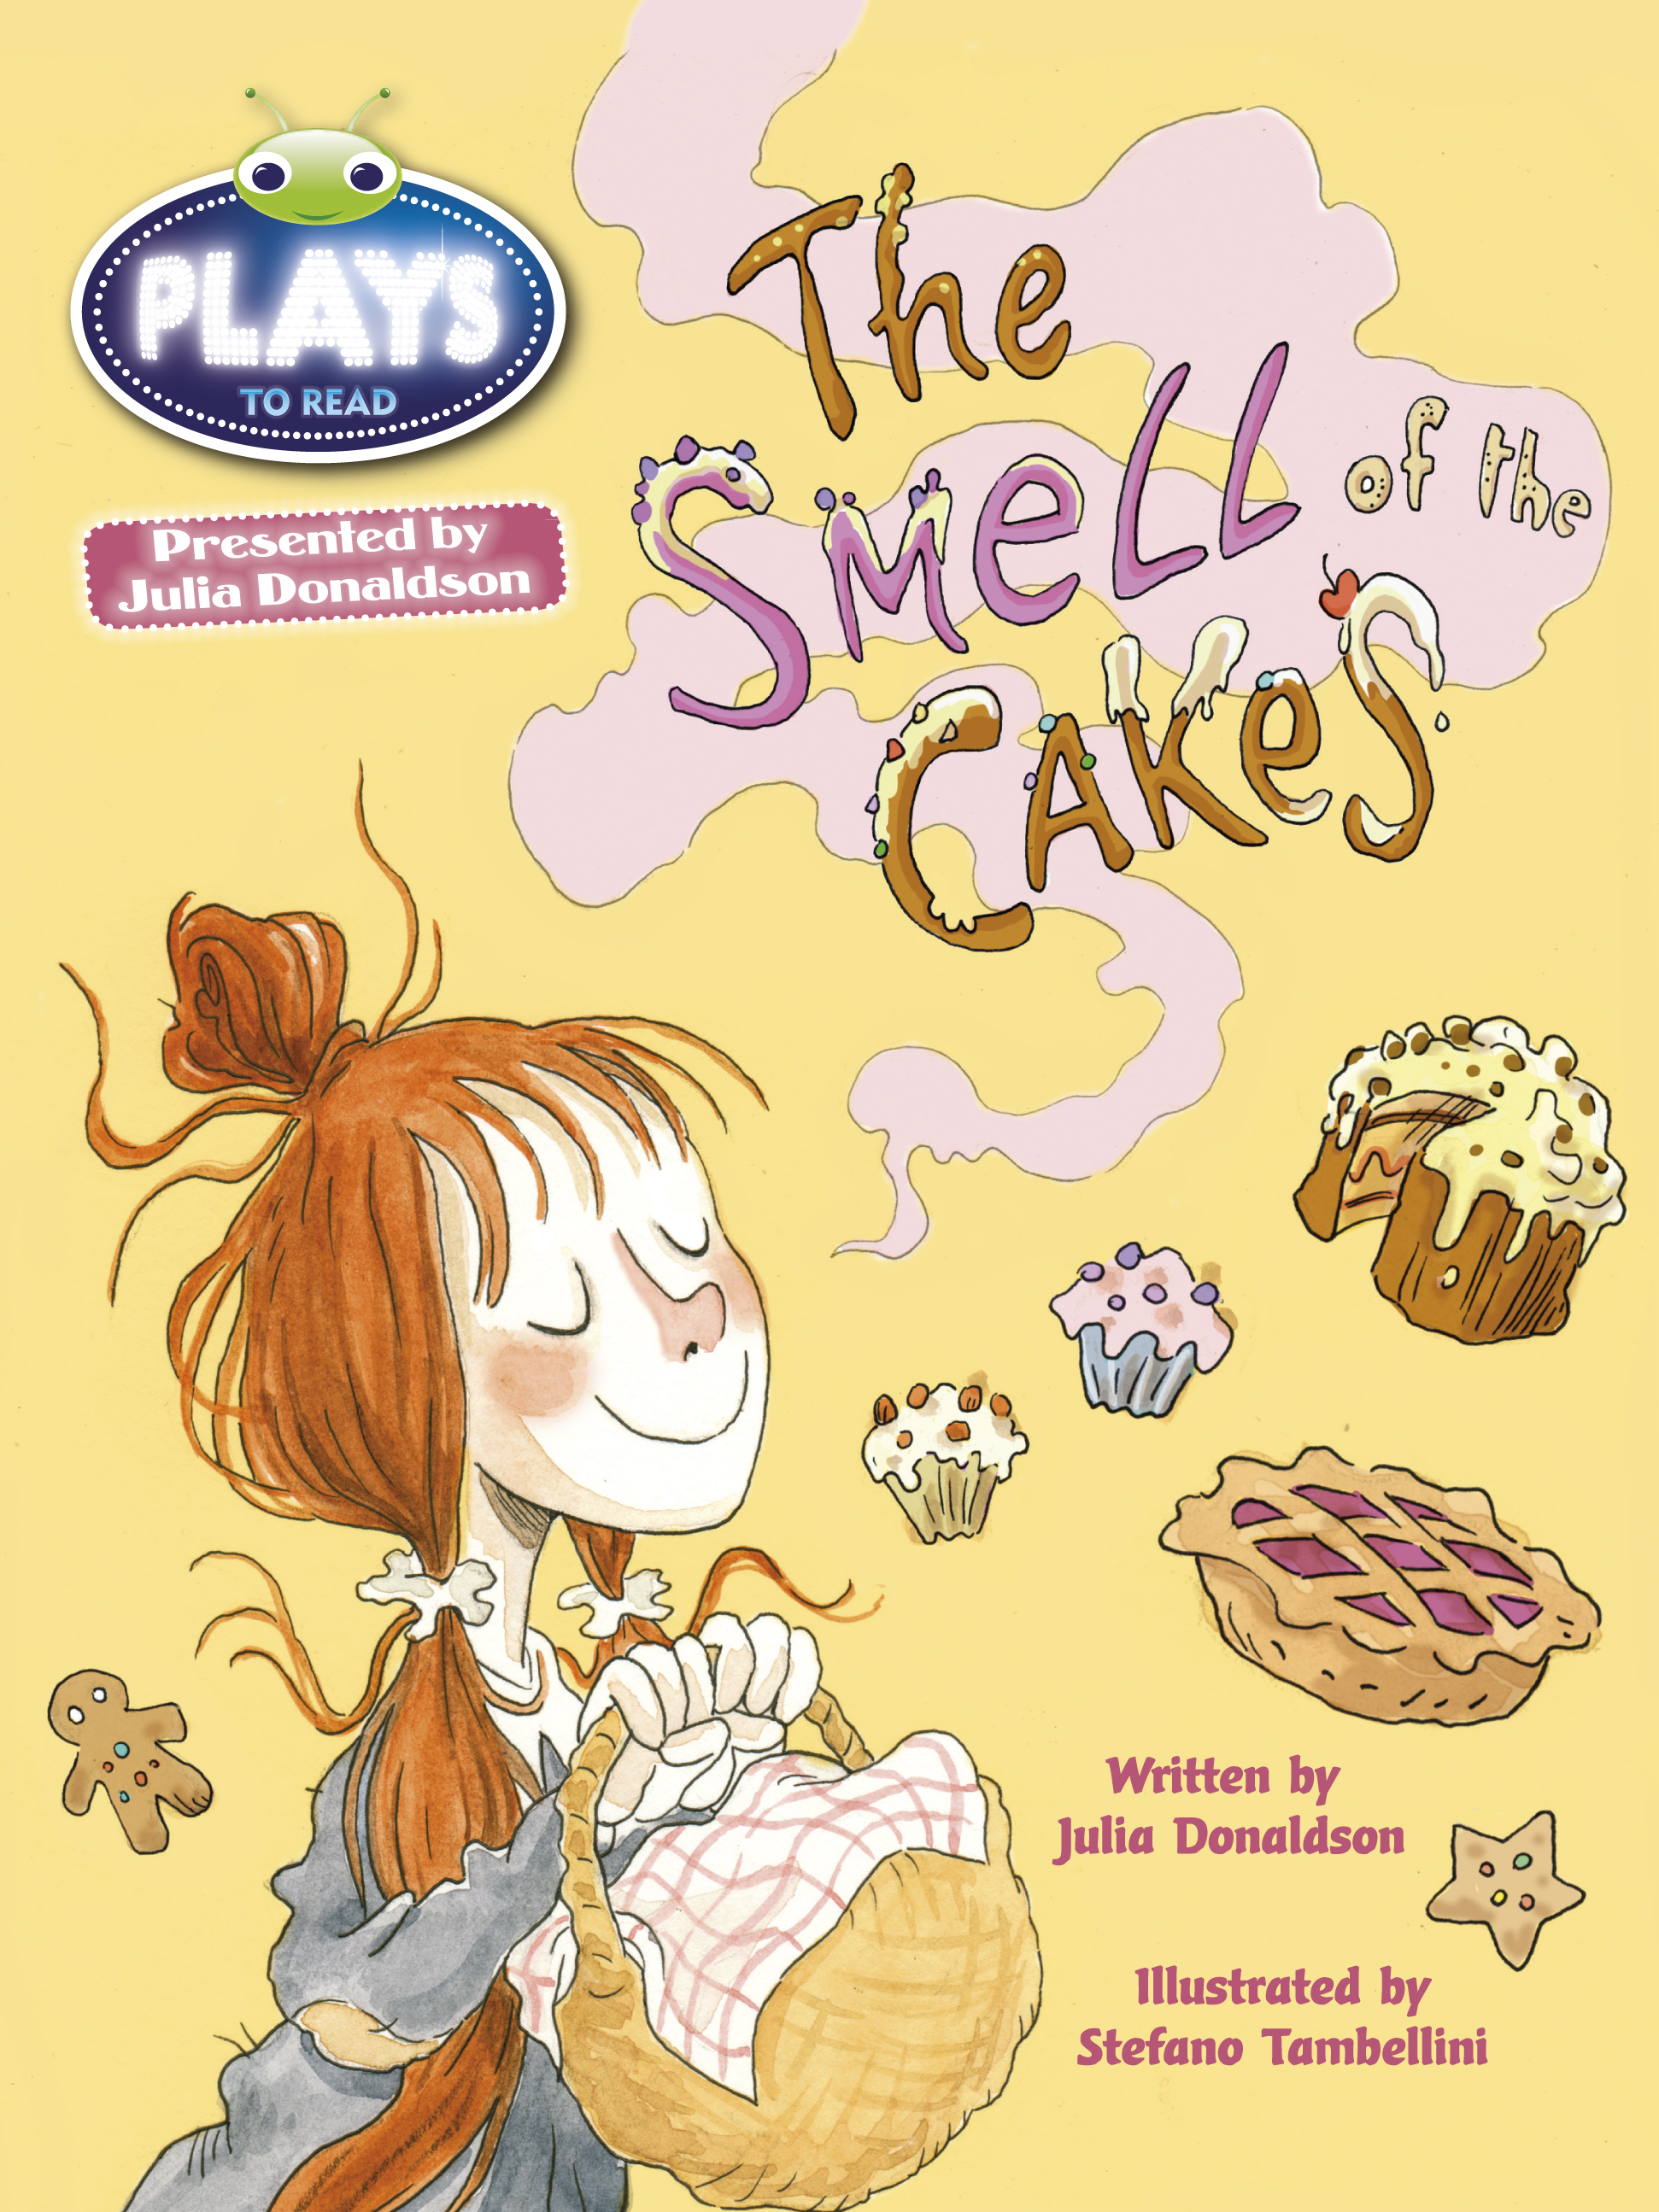 The Smell of Cakes by Julia Donaldson